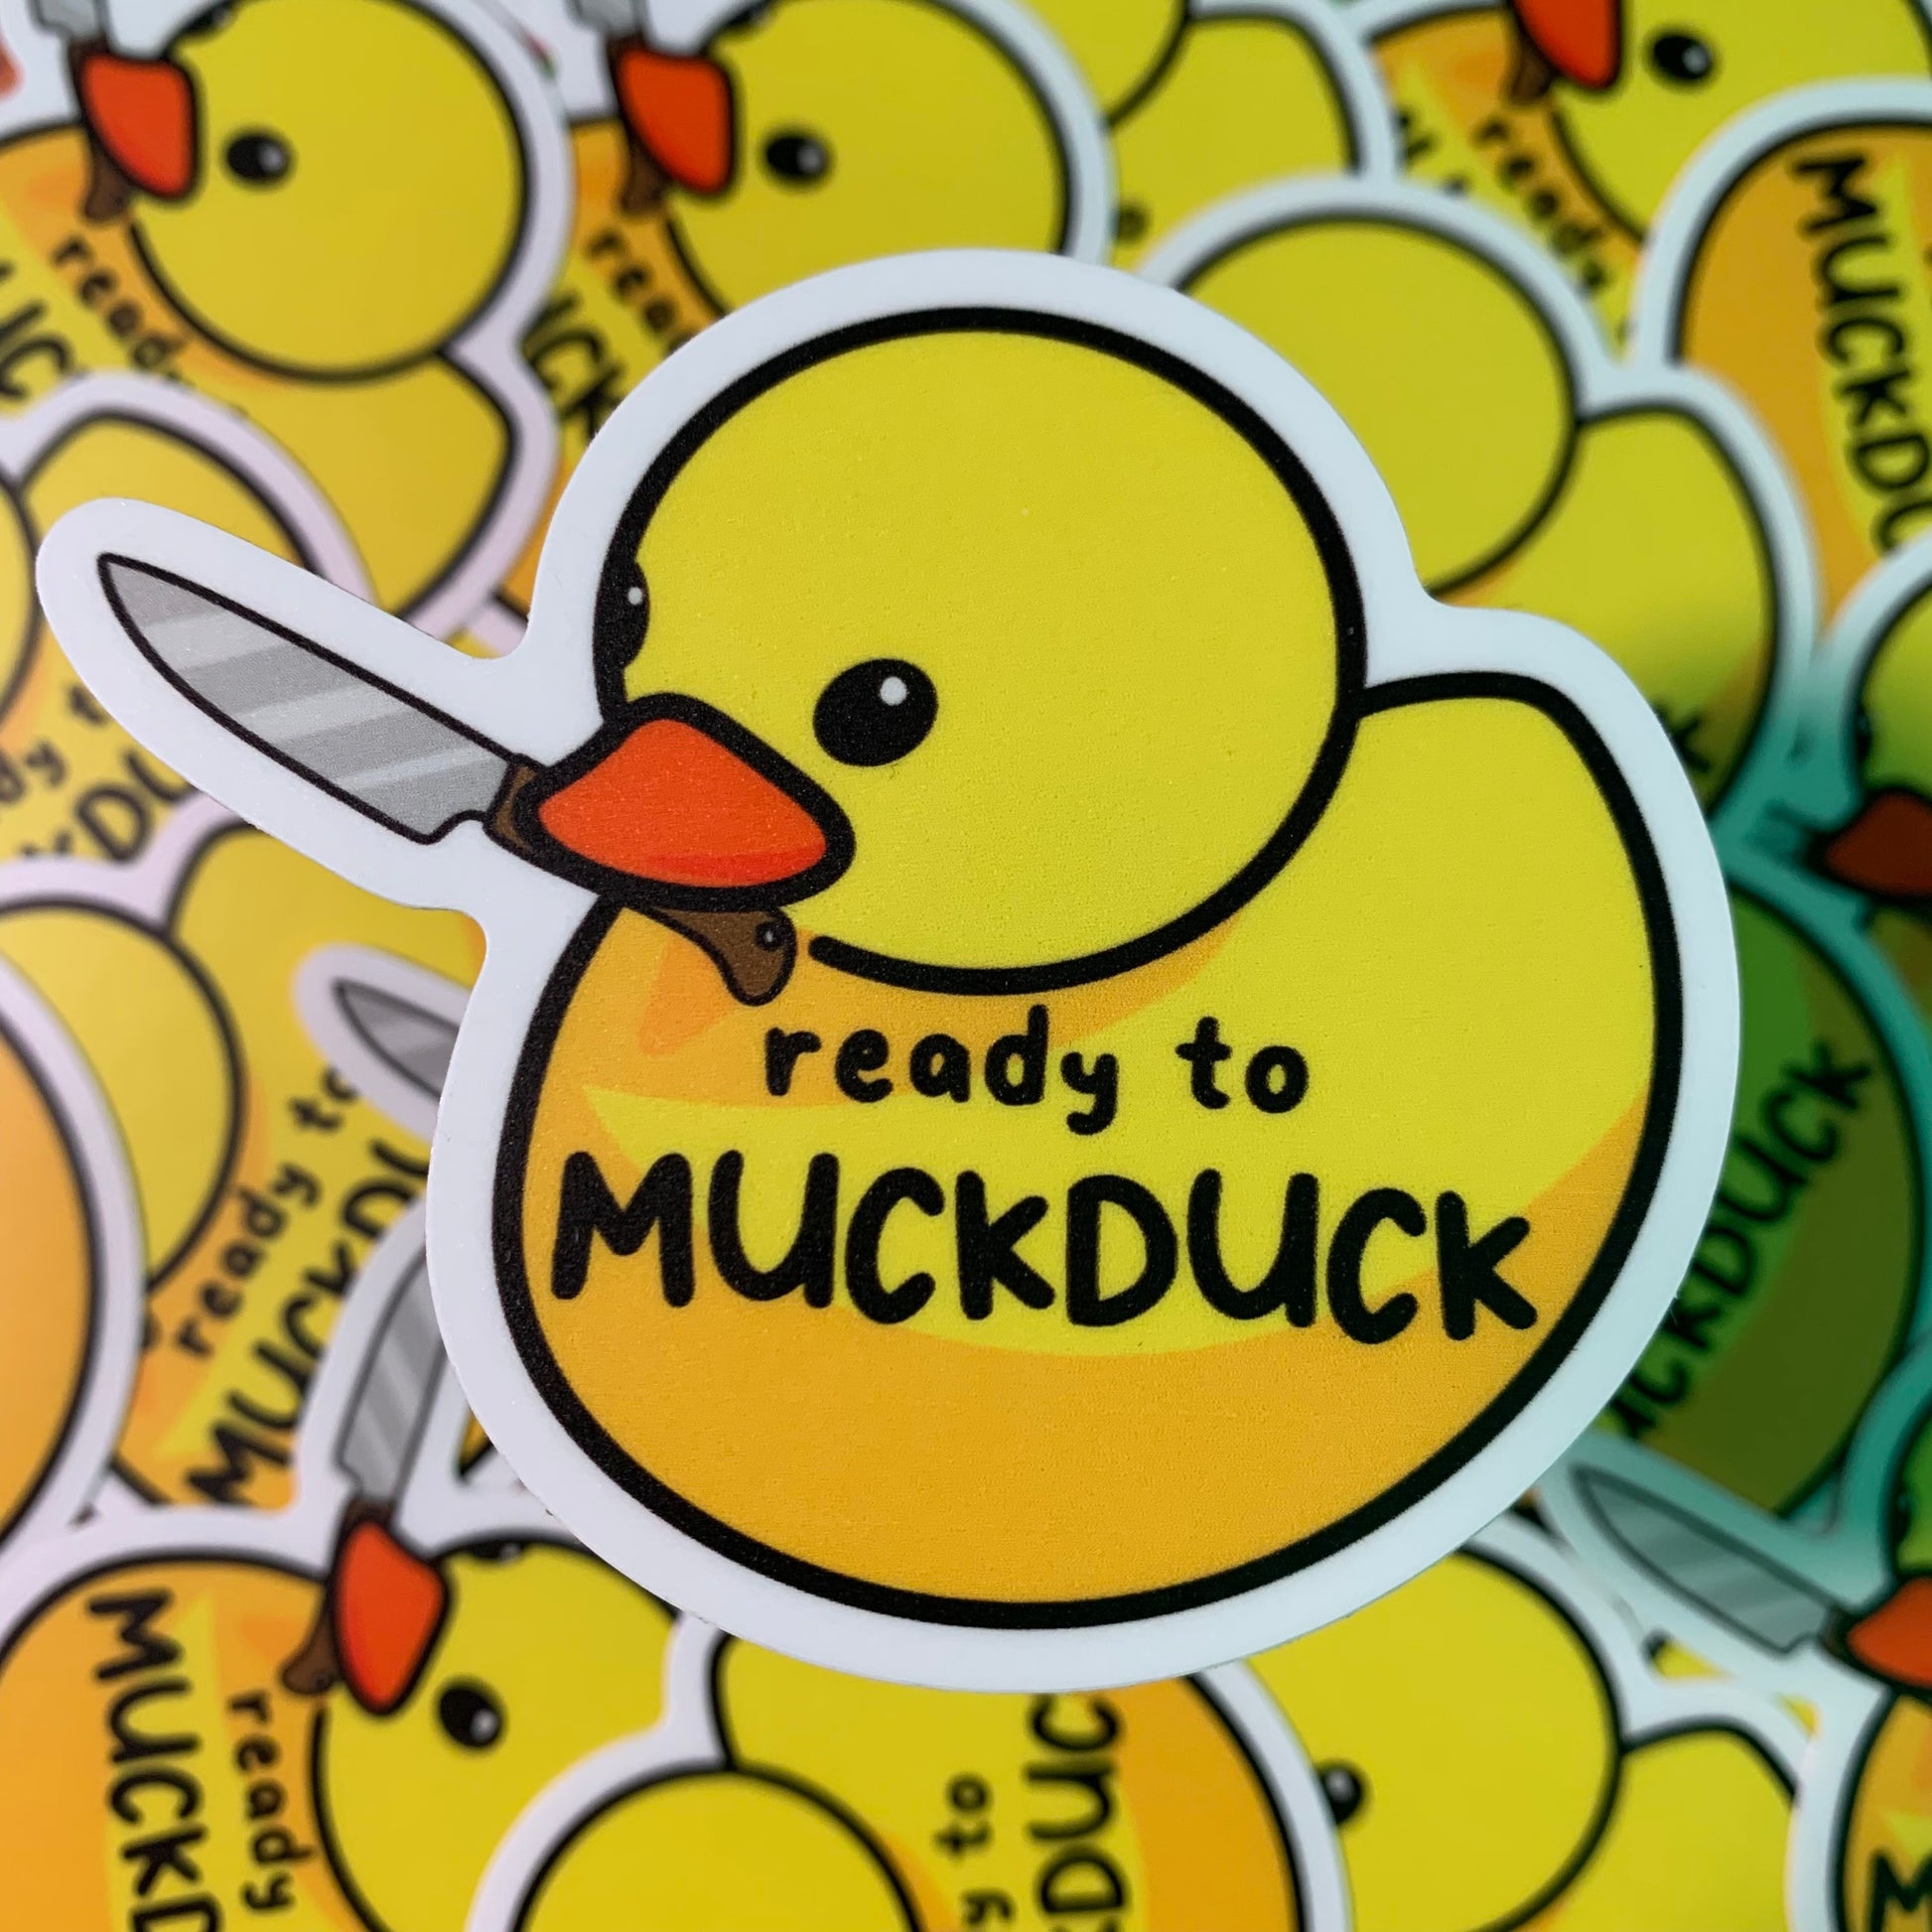 Sticker of a drawn plastic duck holding a kitchen knife, with the words "ready to MUCKDUCK" written on the front.